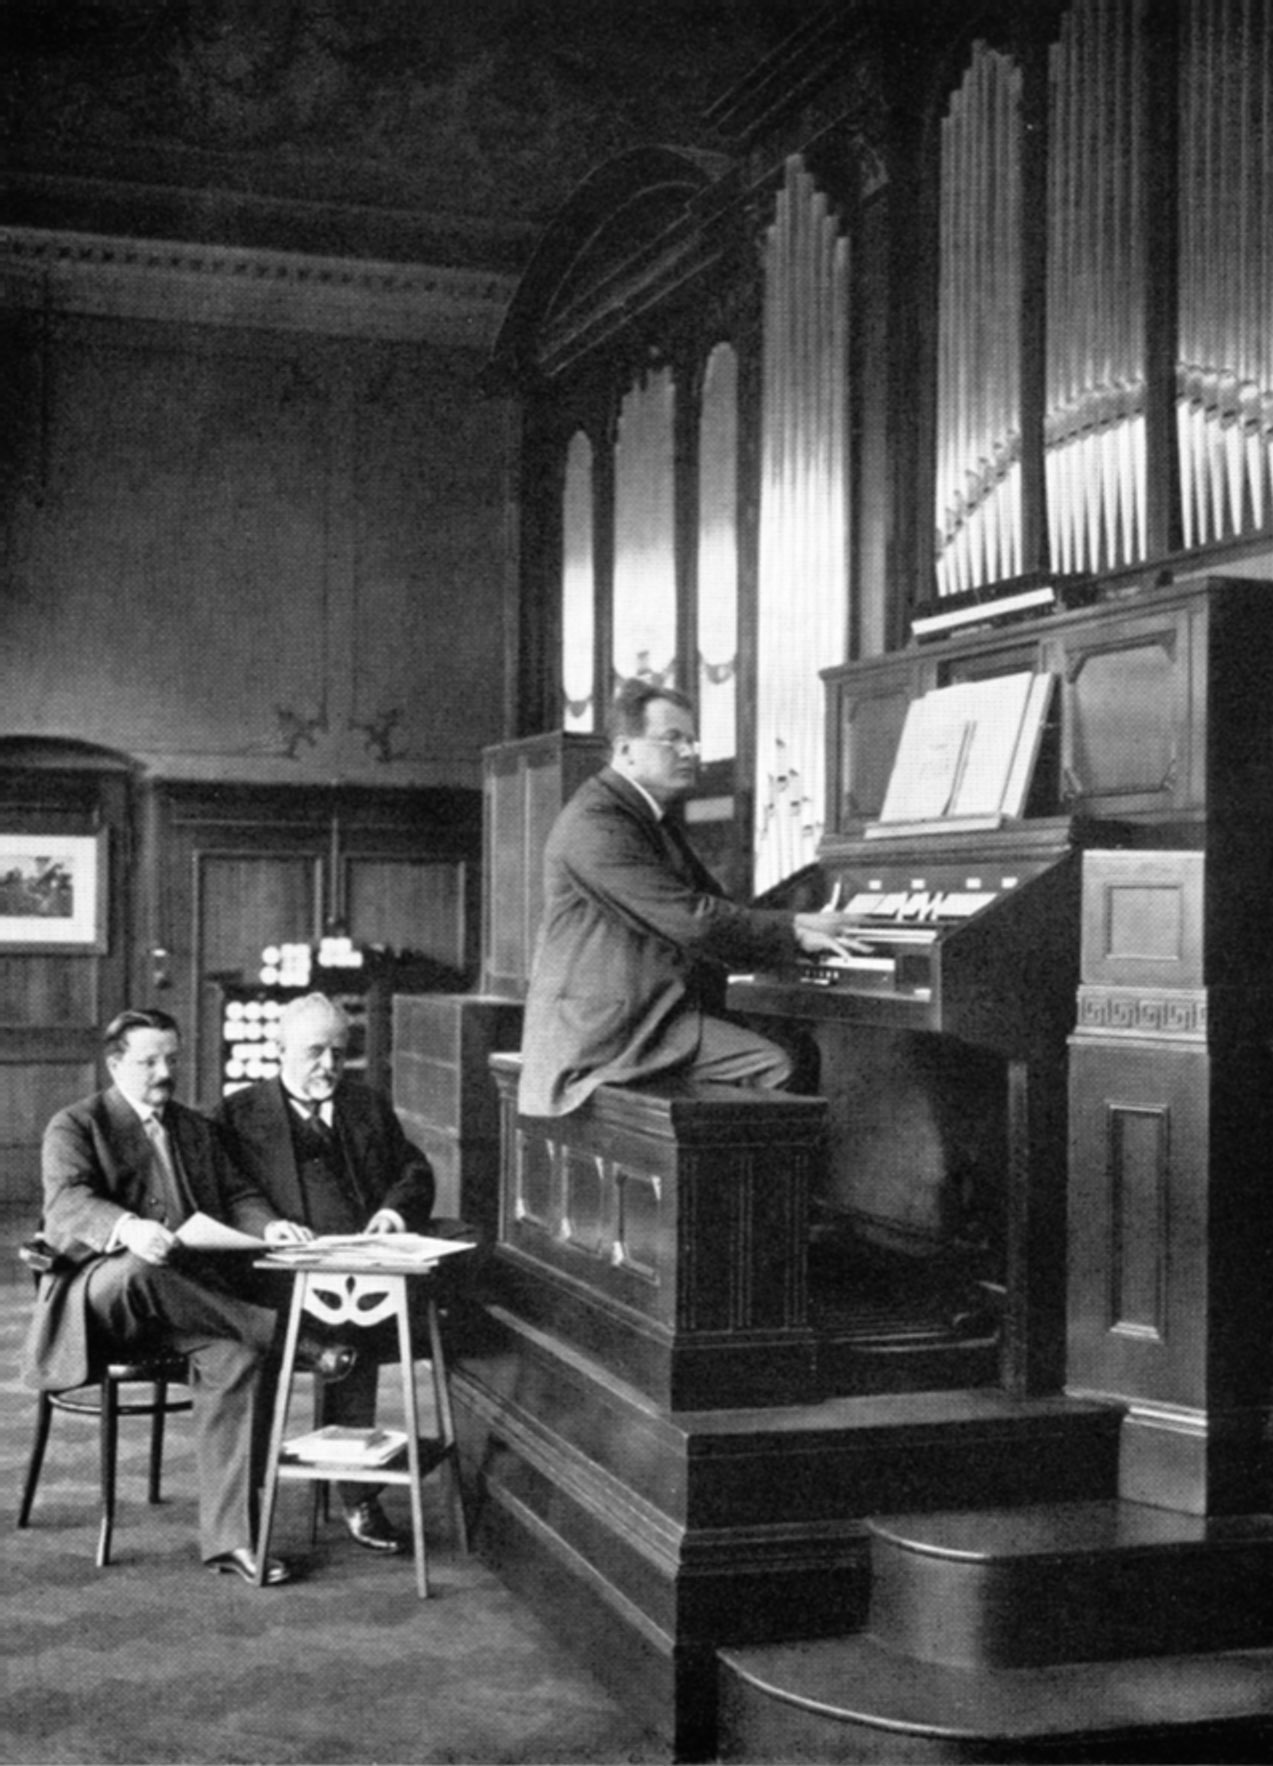 Reger (1913) recording at the Welte-Phiharmonie organ